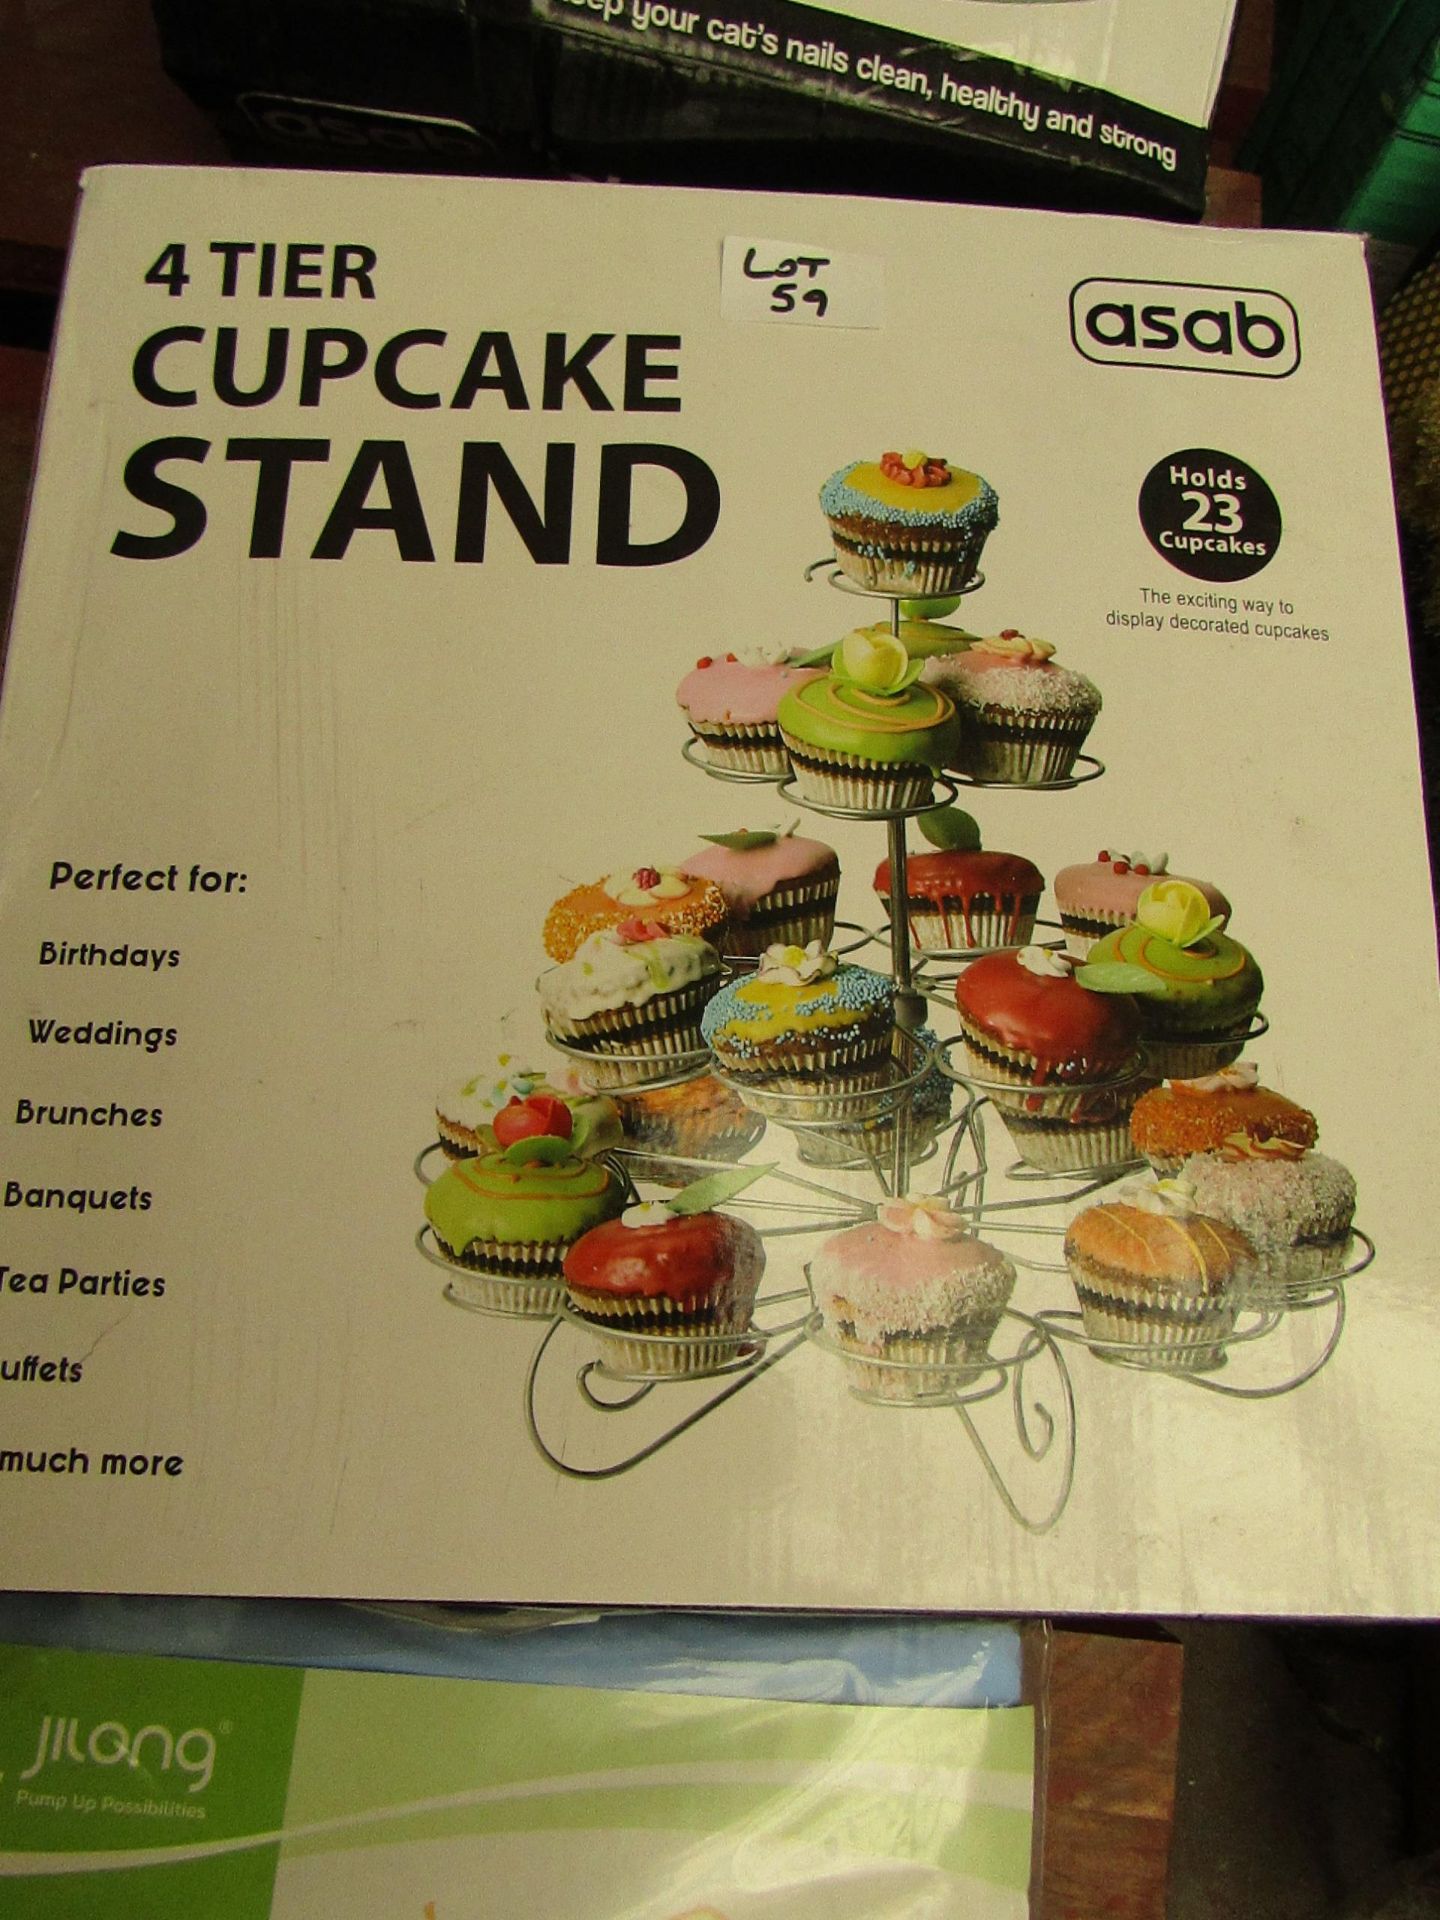 Asab 4 Tier Cupcake Stand. Boxed but unchecked